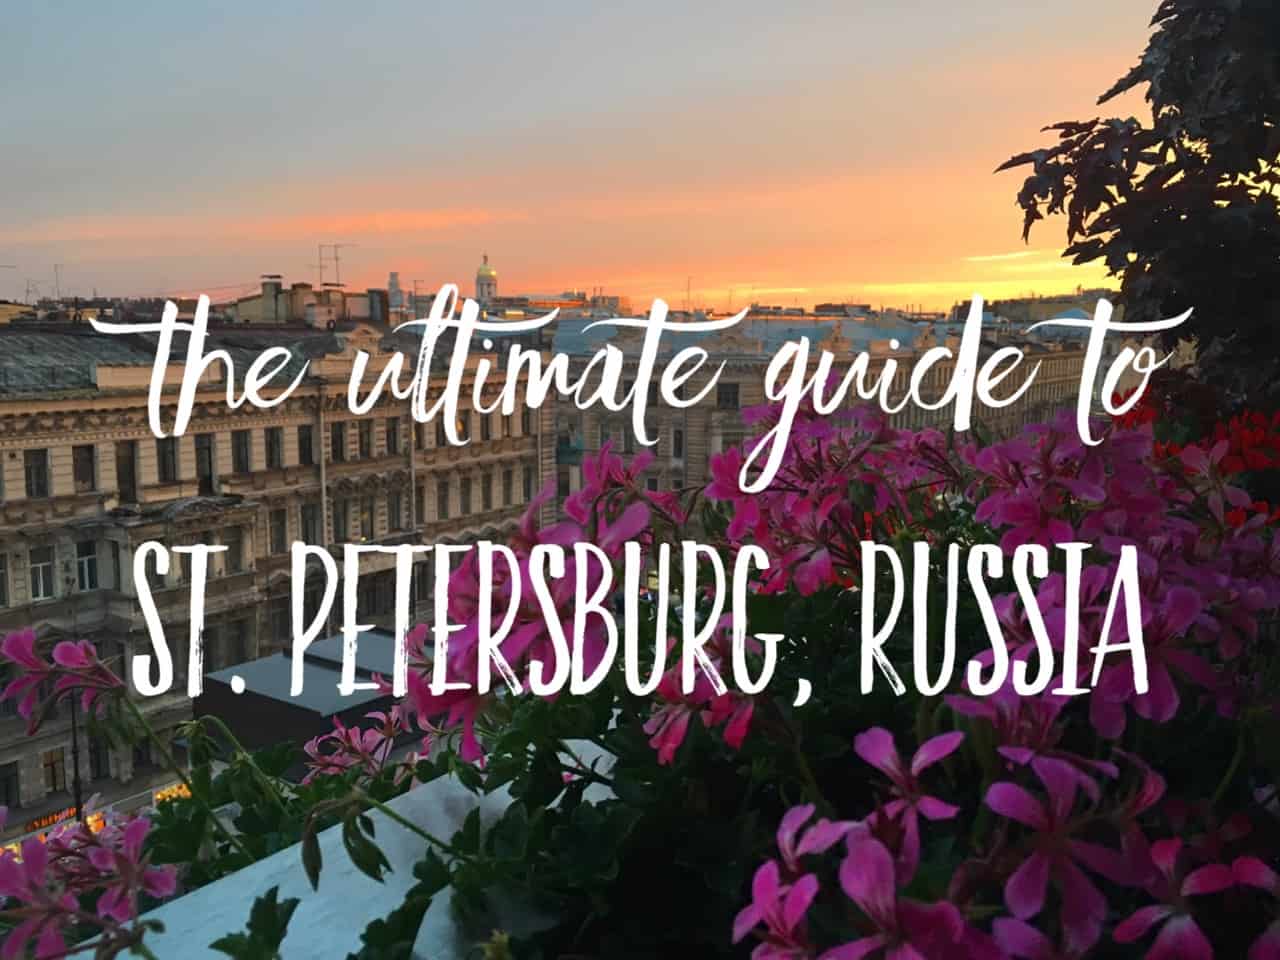 The ultimate guide to St. Petersburg, Russia from a local: places, food, accommodation in Saint Petersburg